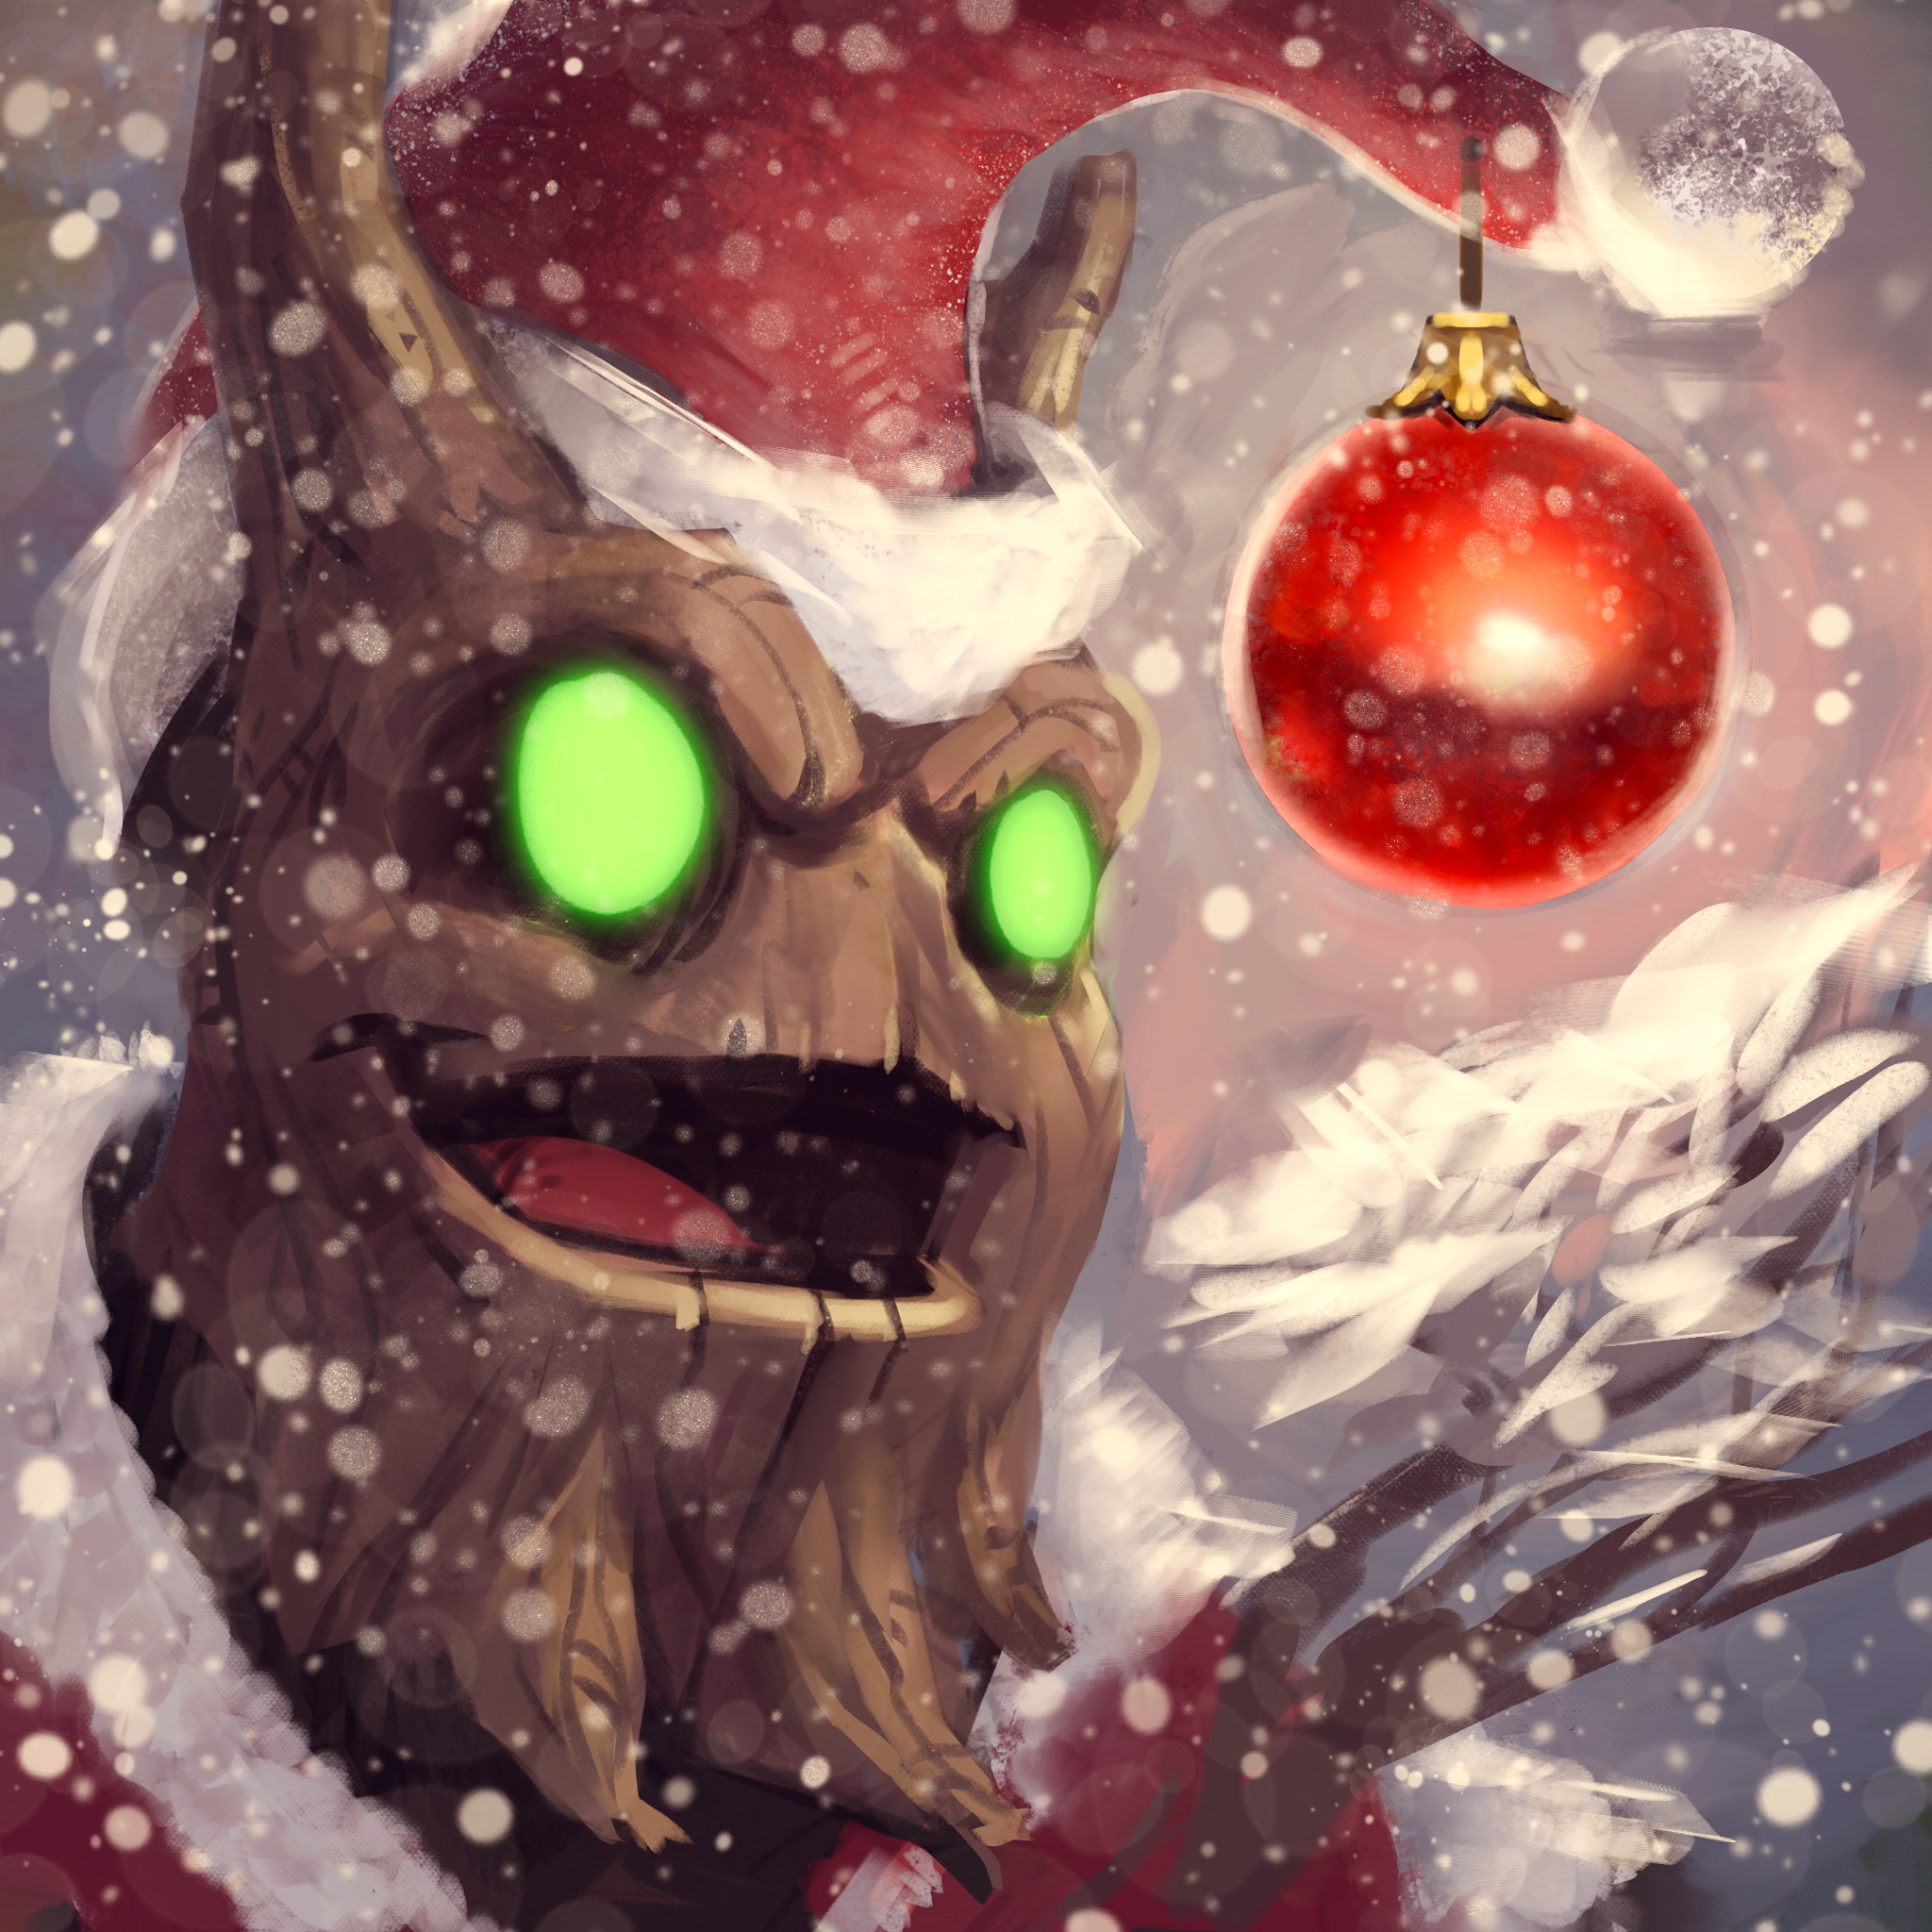 Paladins The Game Today Starts 2x Champion Xp And The Chance At Our Christmas Grover Avatar Get This Avatar By Playing Any 2 Non Bot Games Of The Same Mode In